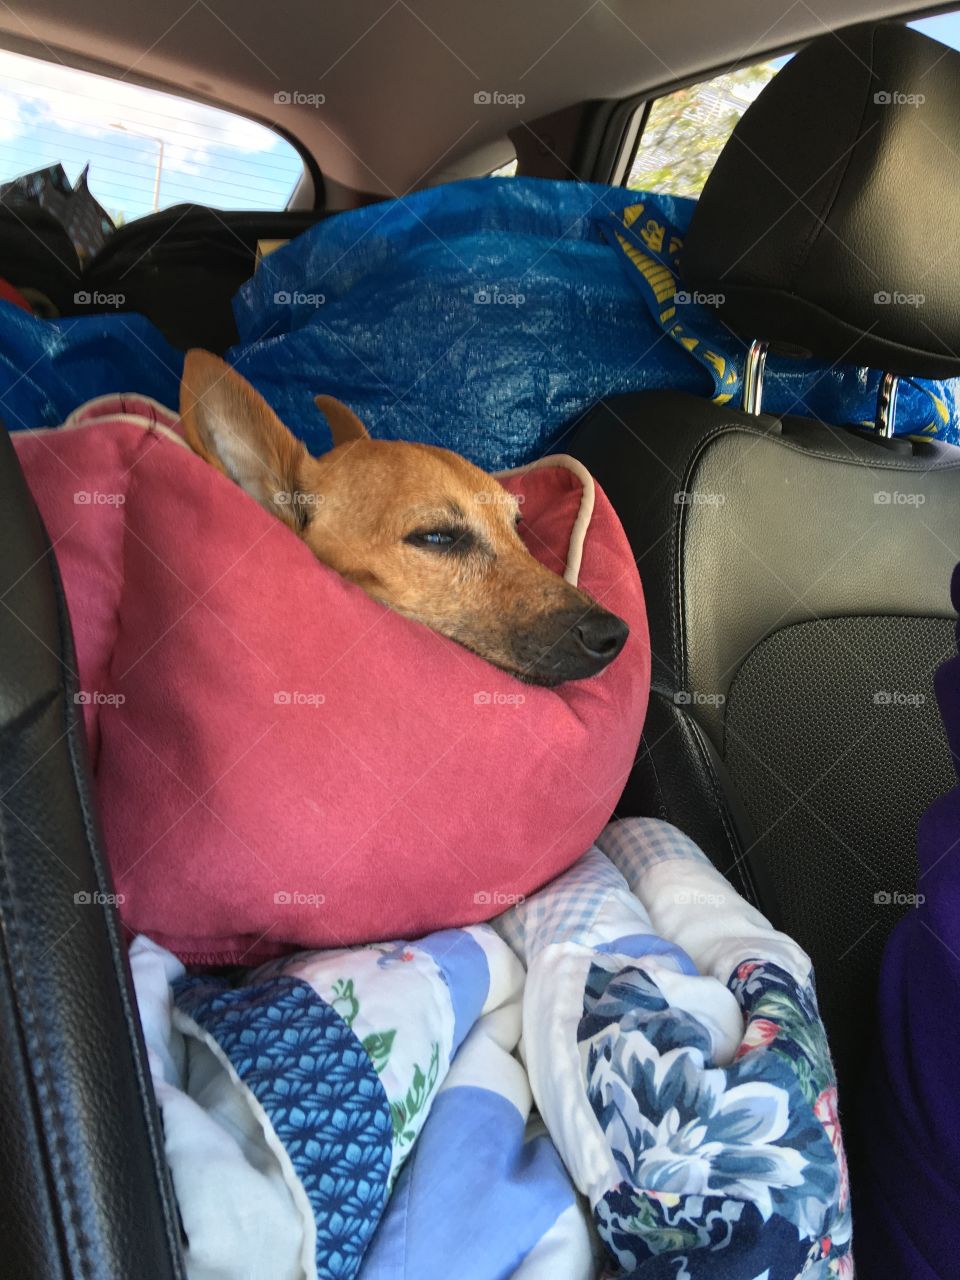 Traveling with a dog between two separate front seats. Blankets raise dog bed high for seeing😄🐾